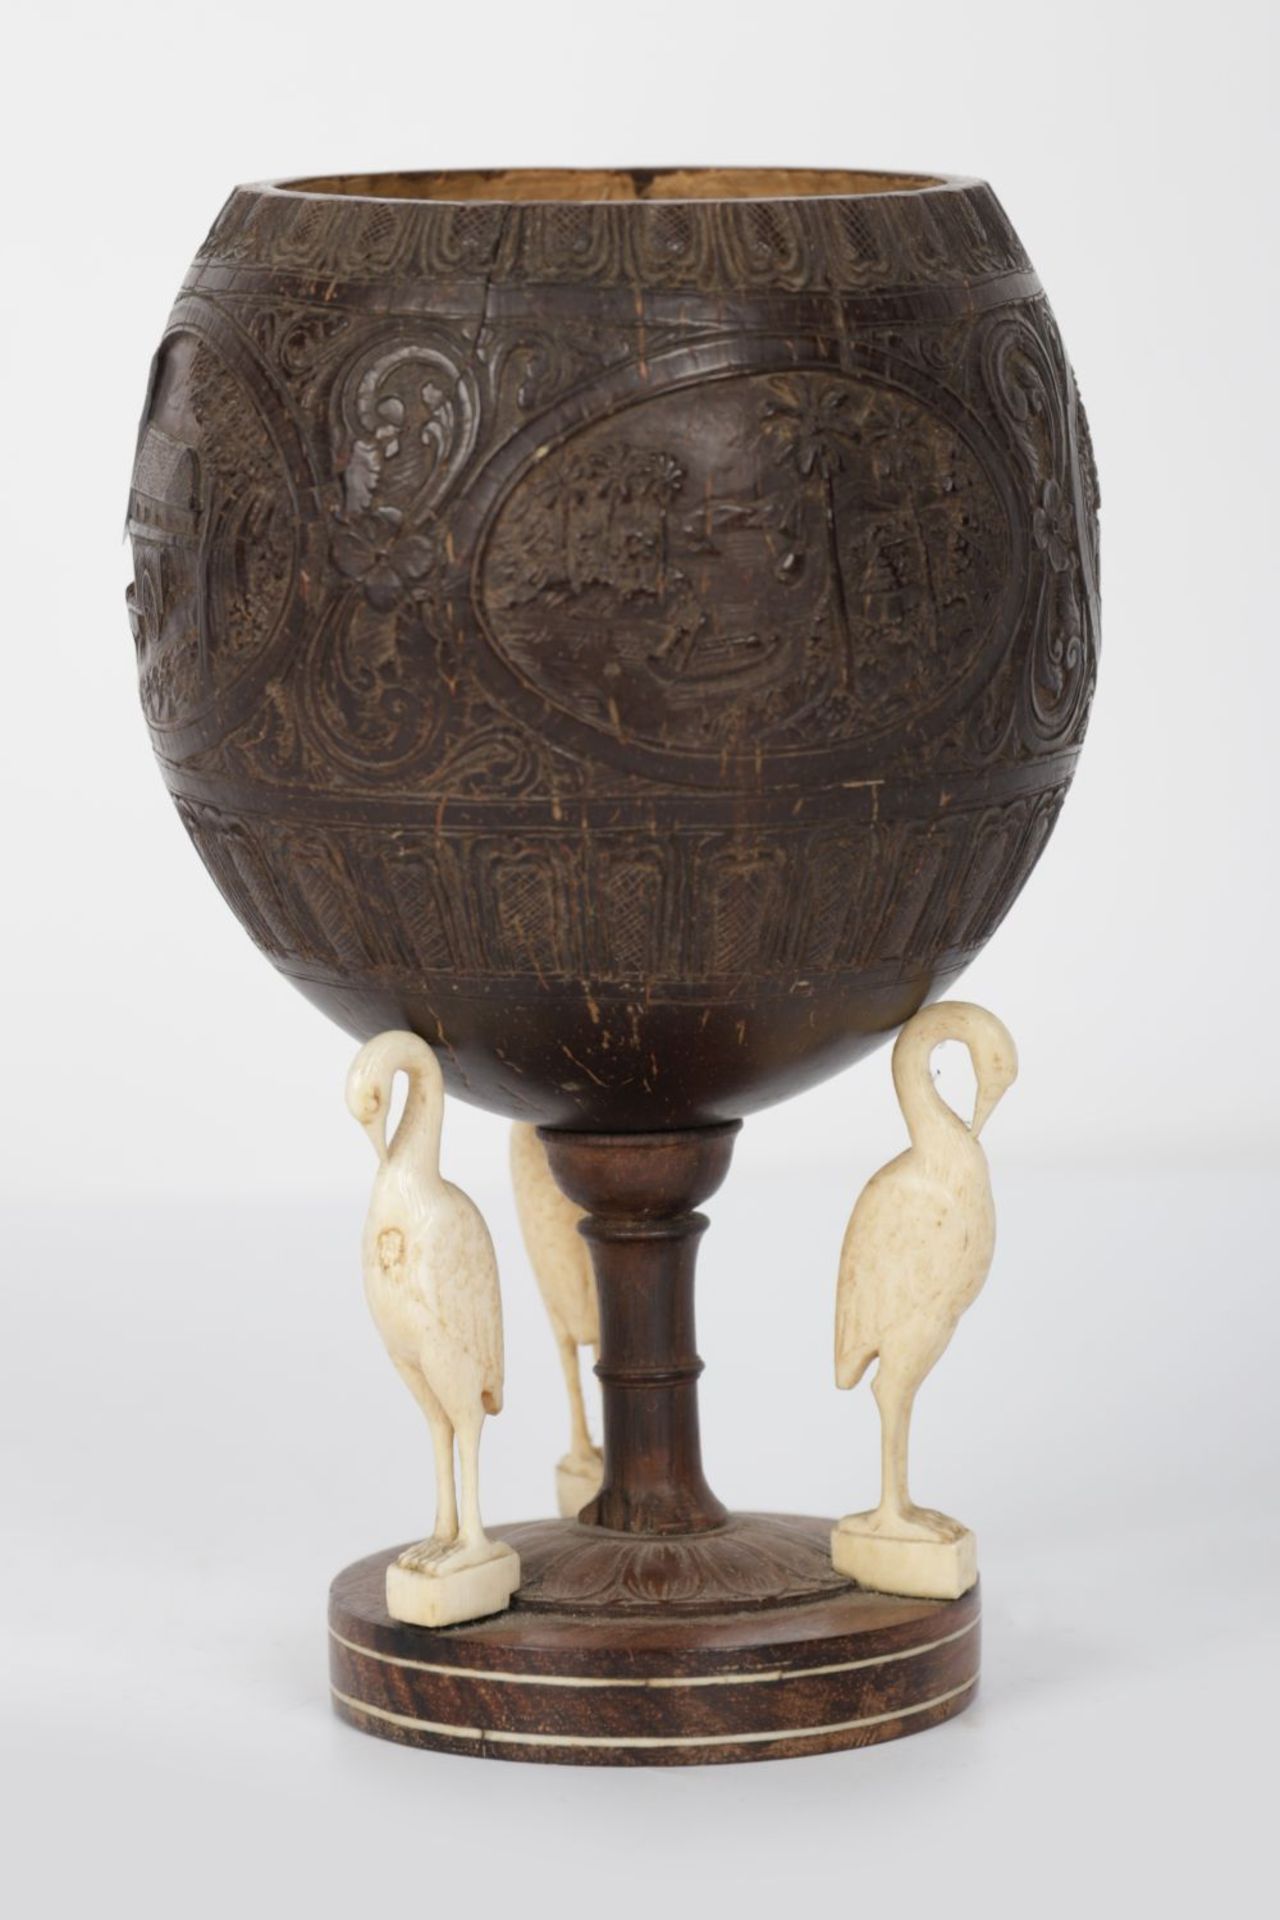 18TH-CENTURY CARVED COCONUT - Image 2 of 2